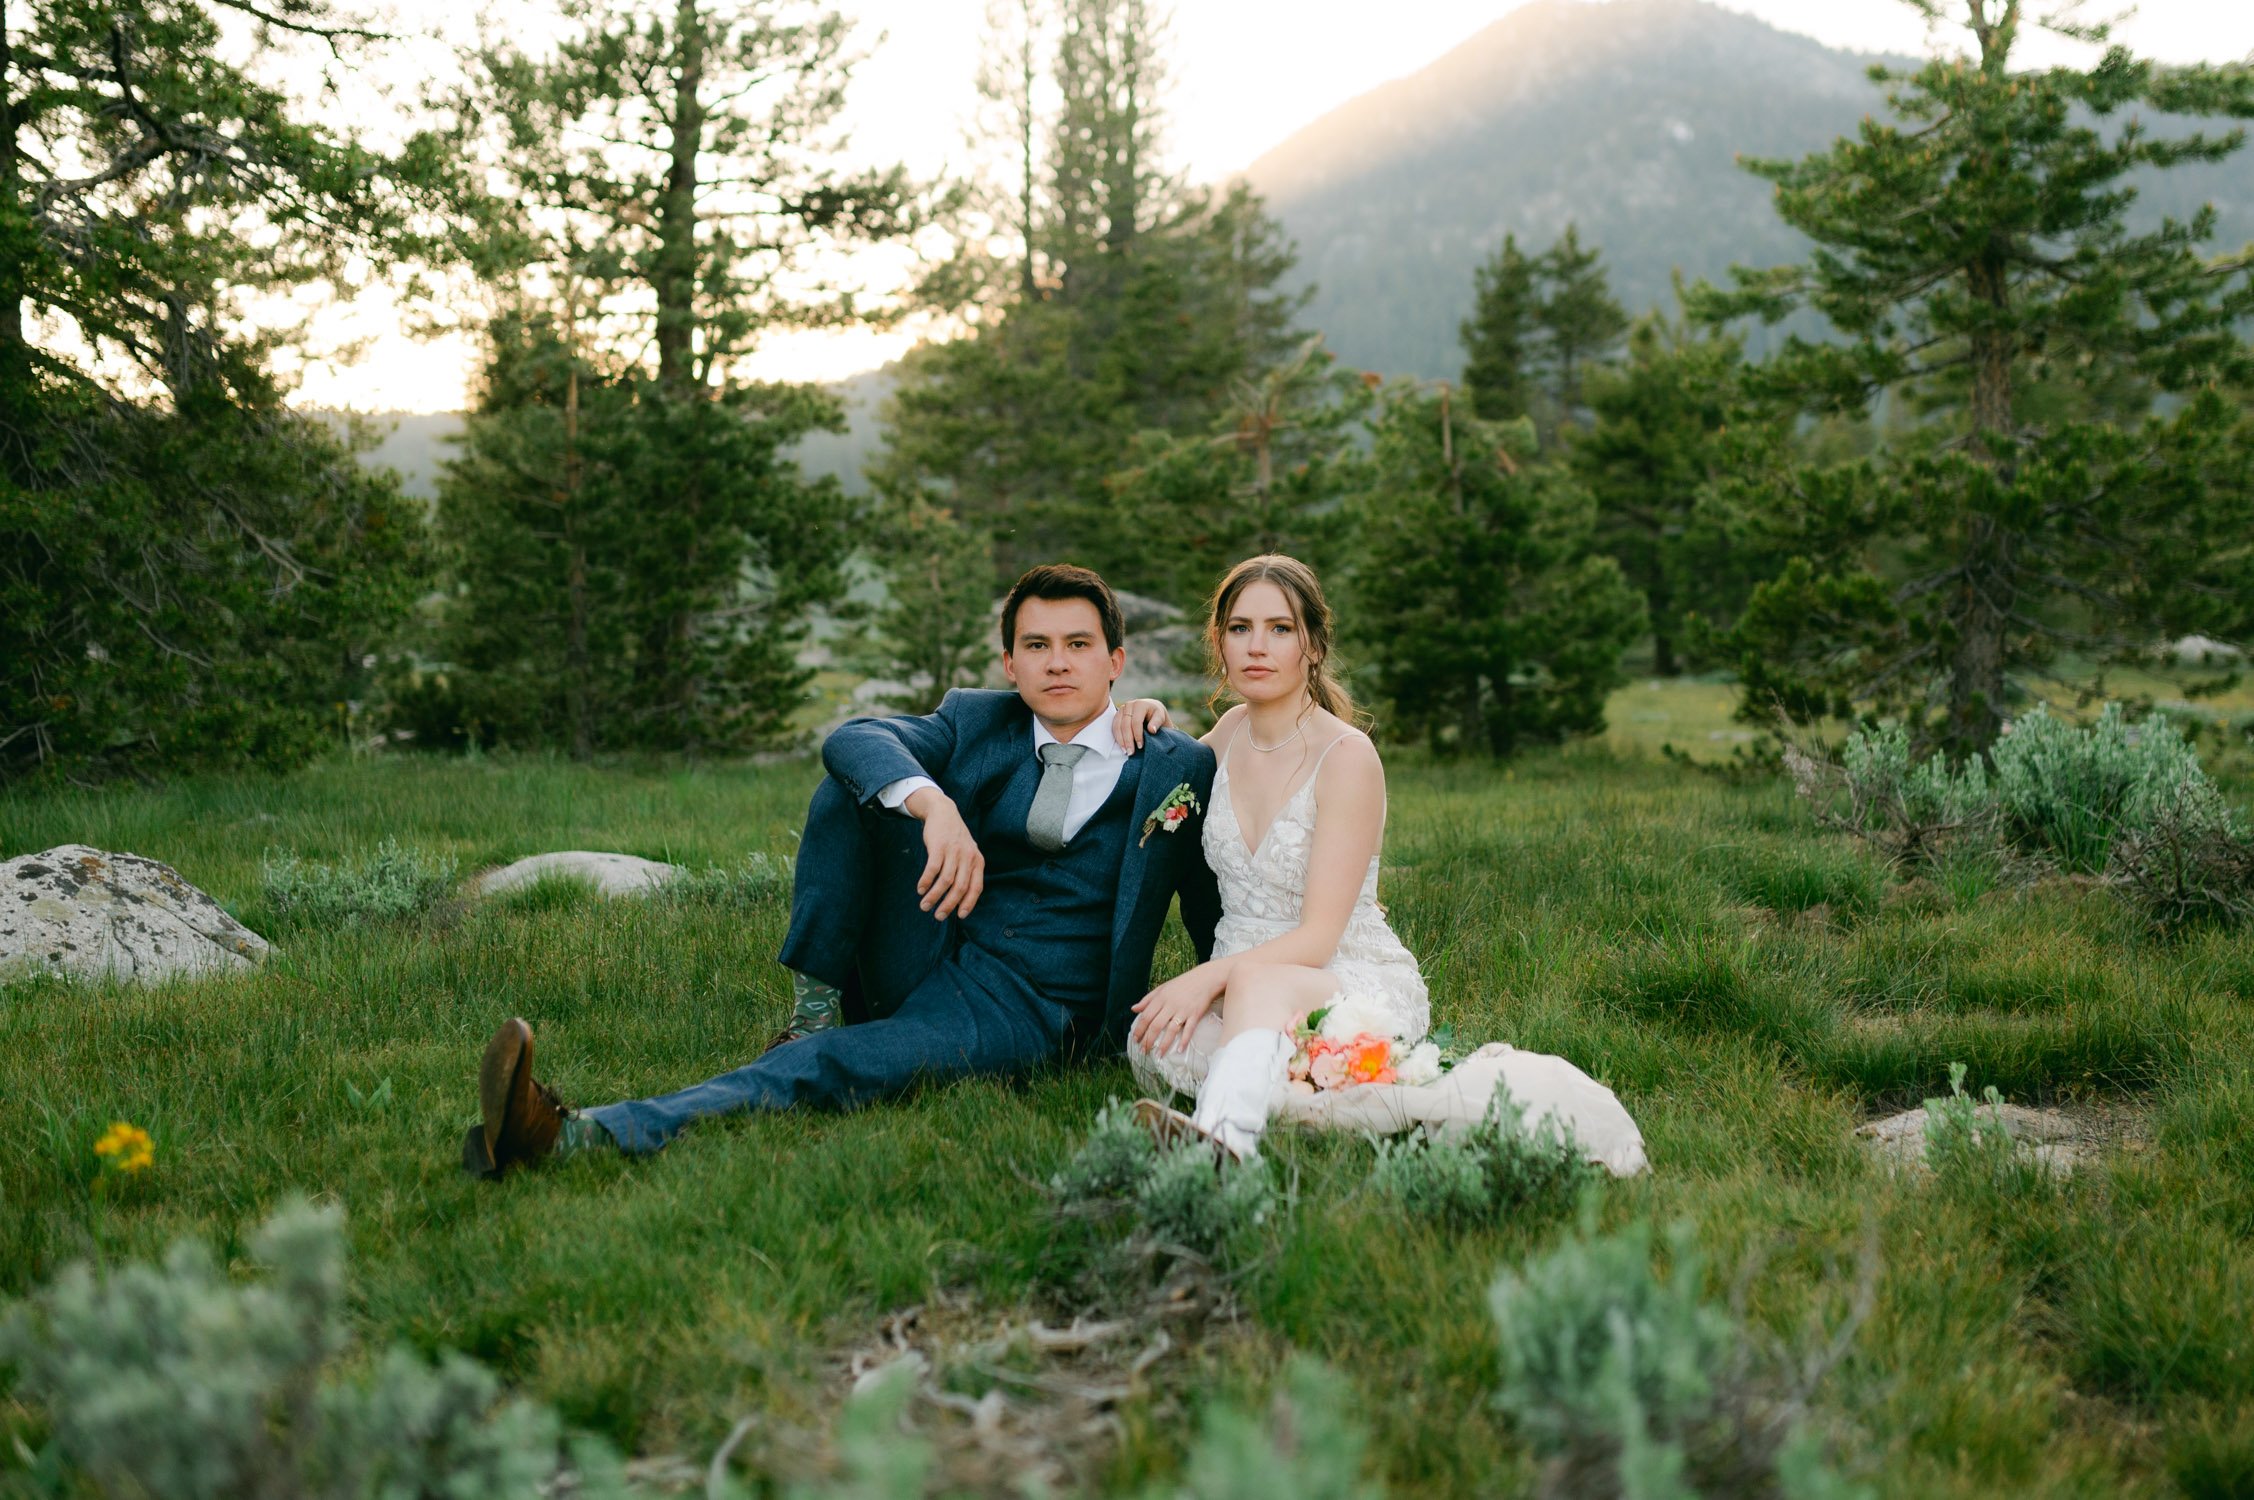 Desolation wilderness hotel wedding, photo of a couple sitting on meadow during sunset